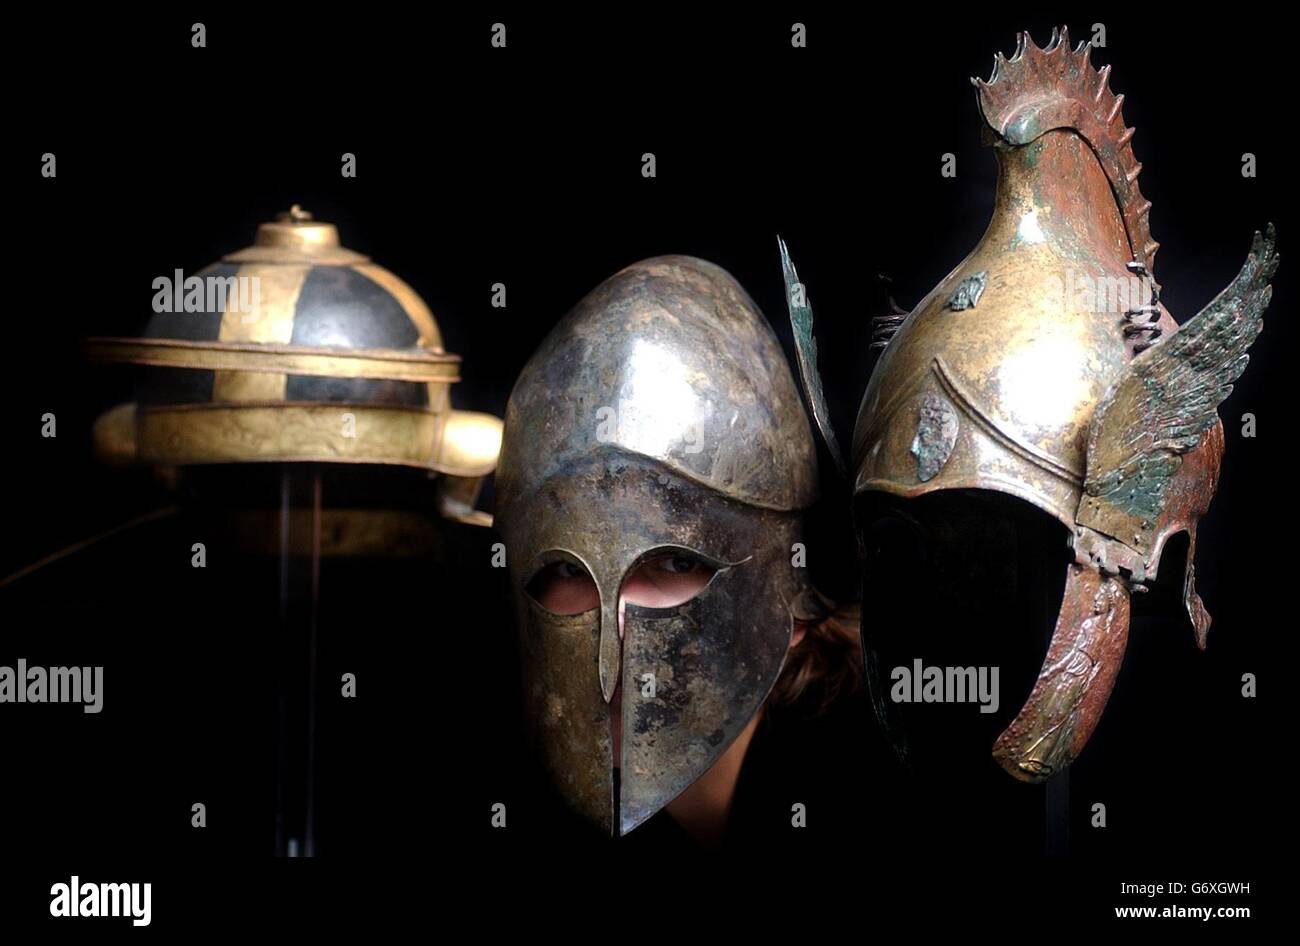 Three helmets that are part of The Axel Guttman Collection of Ancient Arms and Armour Part 2, Tuesday April 27, 2004, (l-r) The Guttmann 'Mouse' Helmet expected to fetch 350,000- 500,000, a Corinthian type bronze helmet expected to fetch 20,000- 30,000 and a Phrygian -Chalcidian type winged bronze helmet expected to fetch 70,000- 90,000, at a sale to be held at Christies, South Kensington. Stock Photo